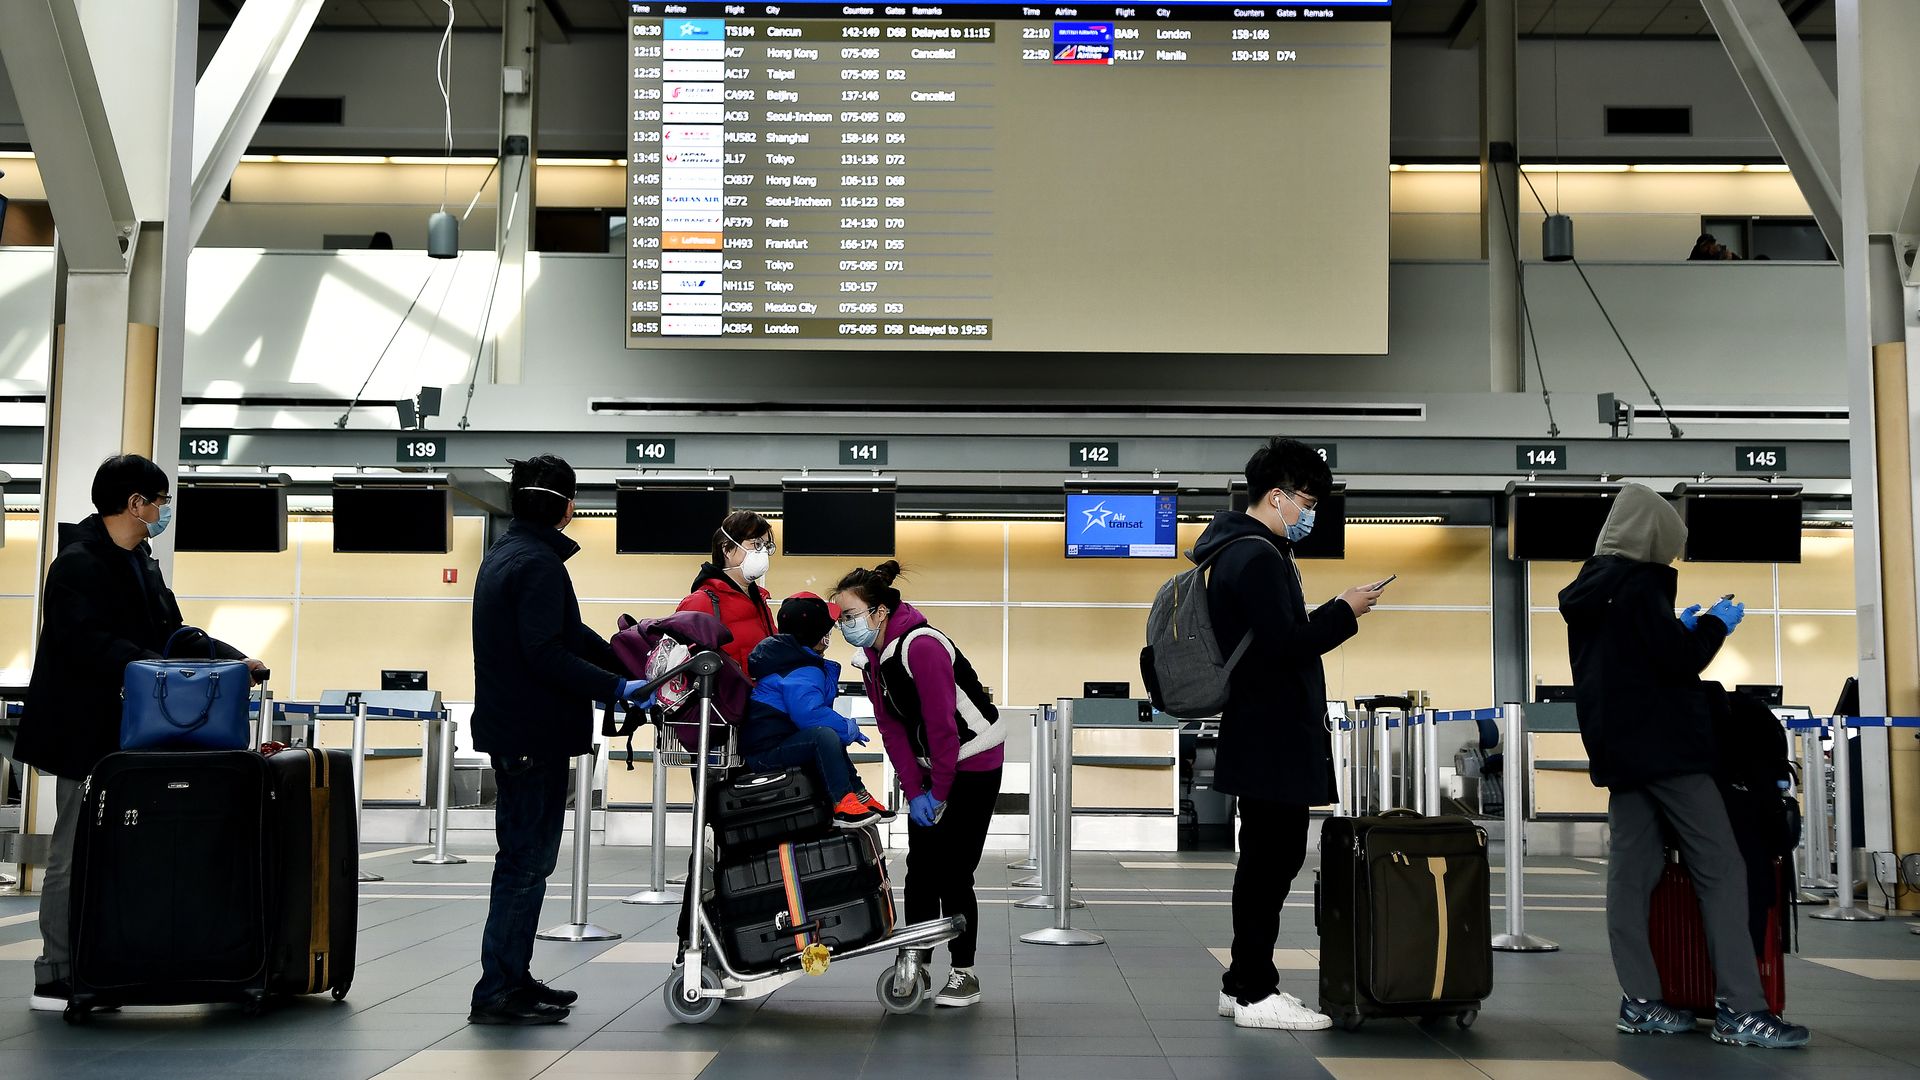 Travelers wearing protective masks wait in line in the international departures area in Vancouver International Aiport (YVR) in Vancouver, British Columbia, Canada